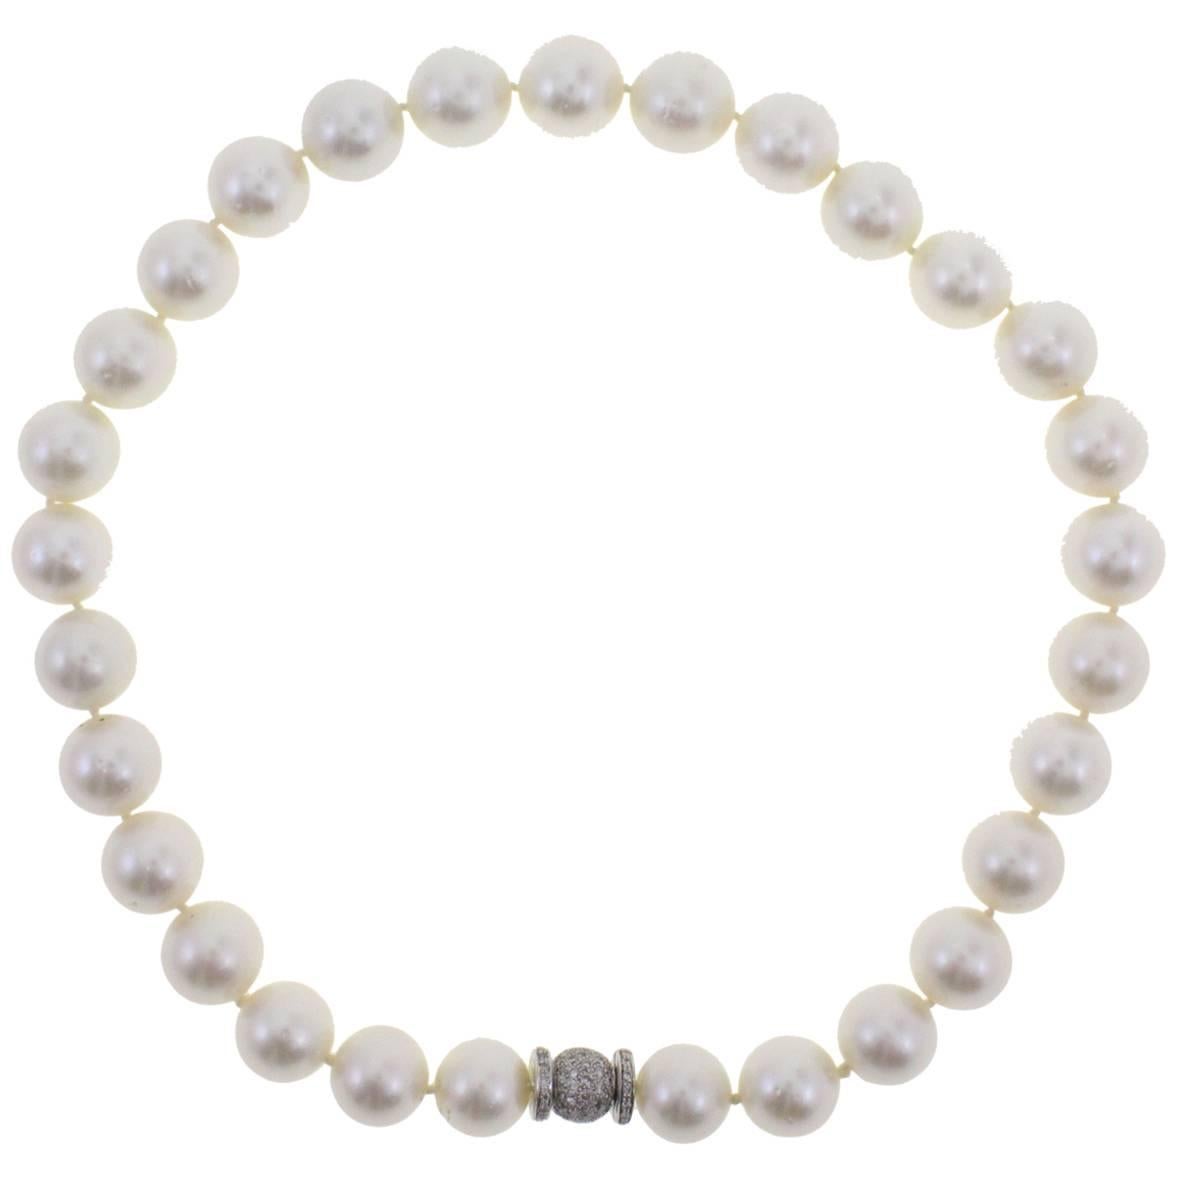 600 ct Australian Pearls, 1.82 ct Diamonds, White Gold Closure Beaded Necklace For Sale